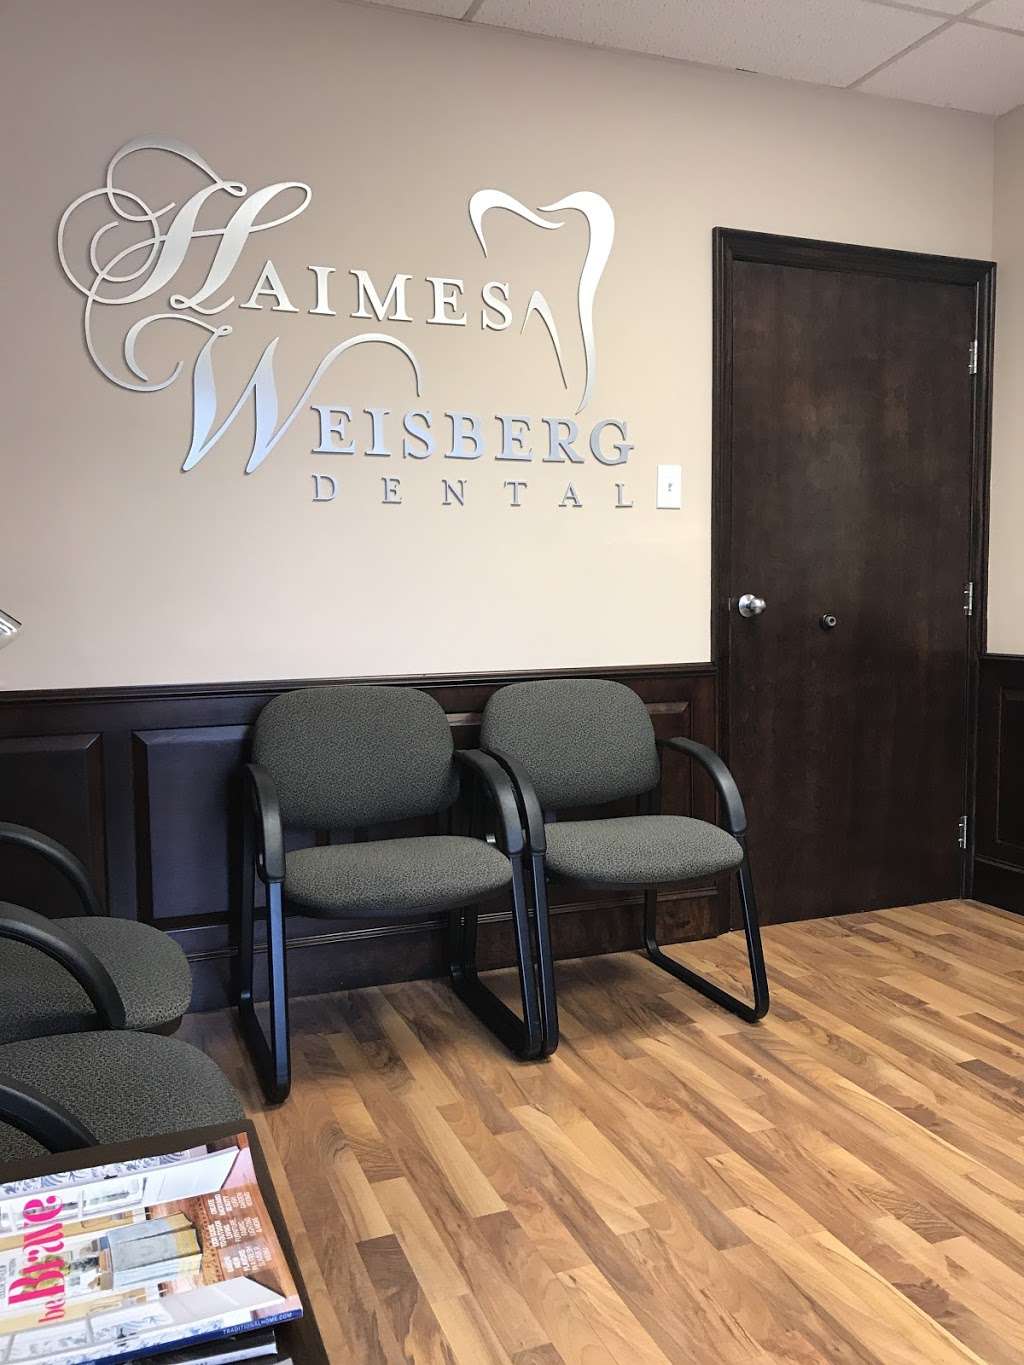 Haimes & Weisberg Family Dentistry | 28a, 1901 N Olden Ave, Ewing Township, NJ 08618, USA | Phone: (609) 882-2294